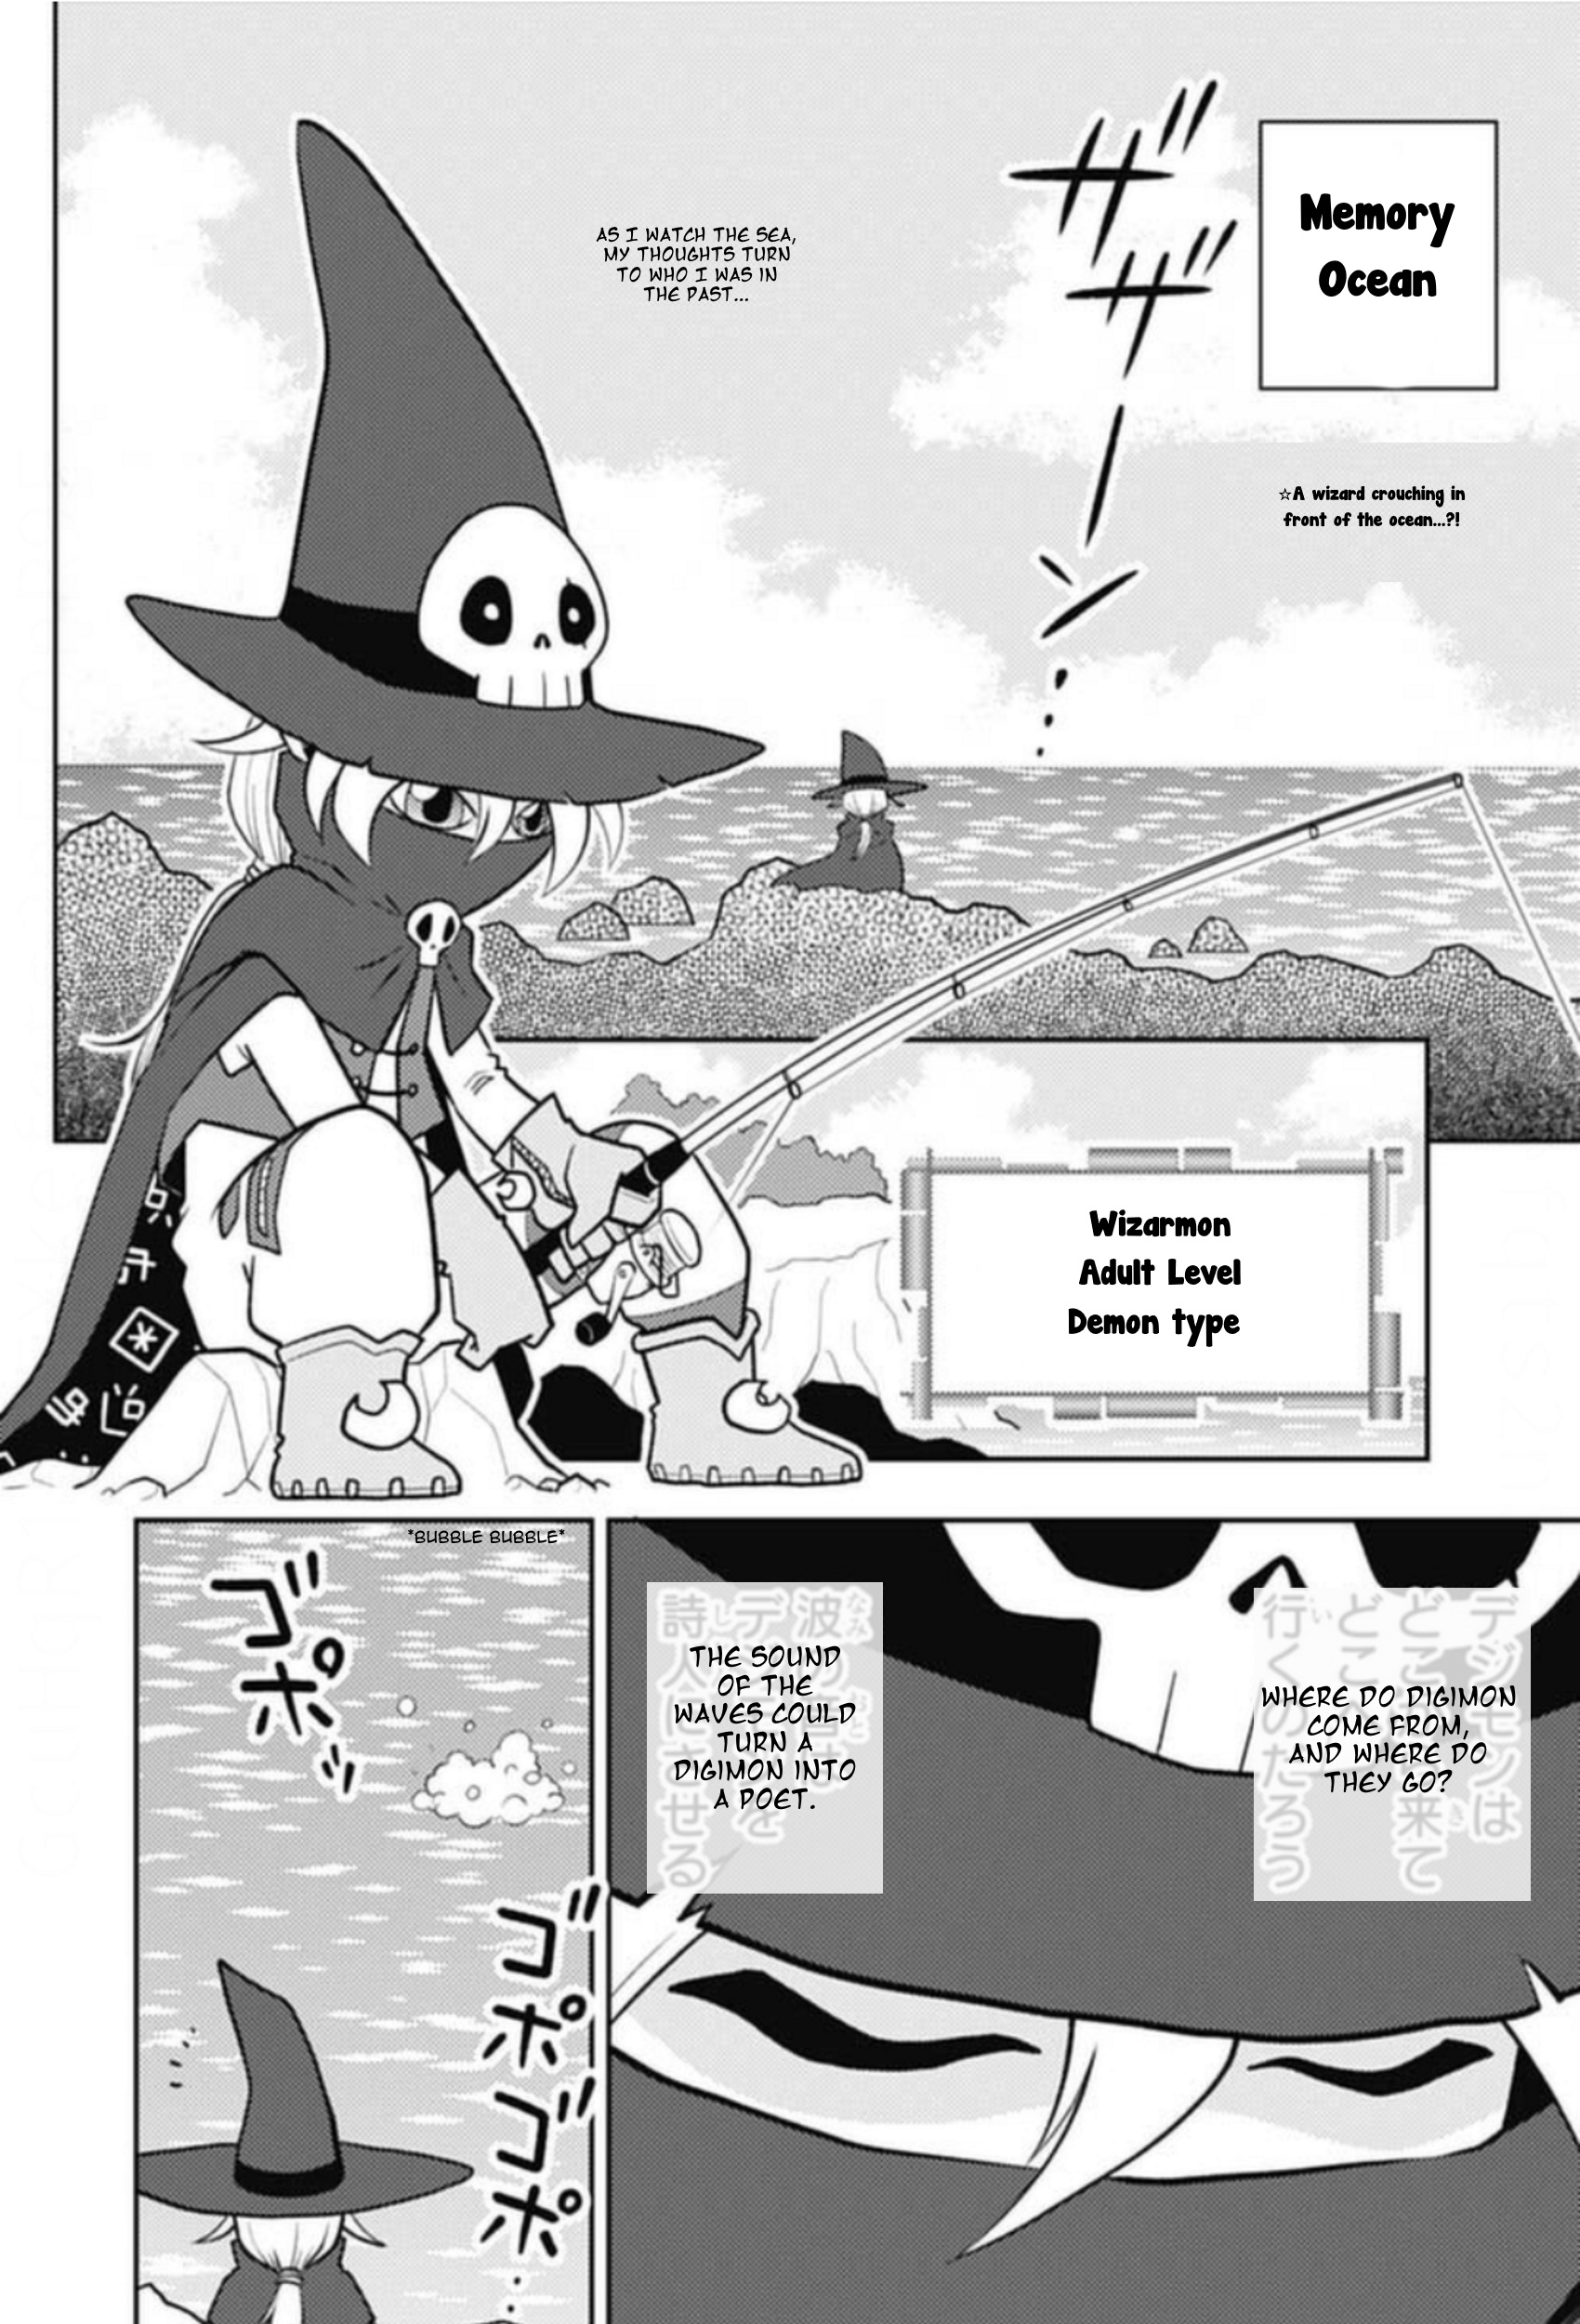 Digimon Dreamers Vol.1 Chapter 12: Wizarmon Of Memory Ocean - Picture 3